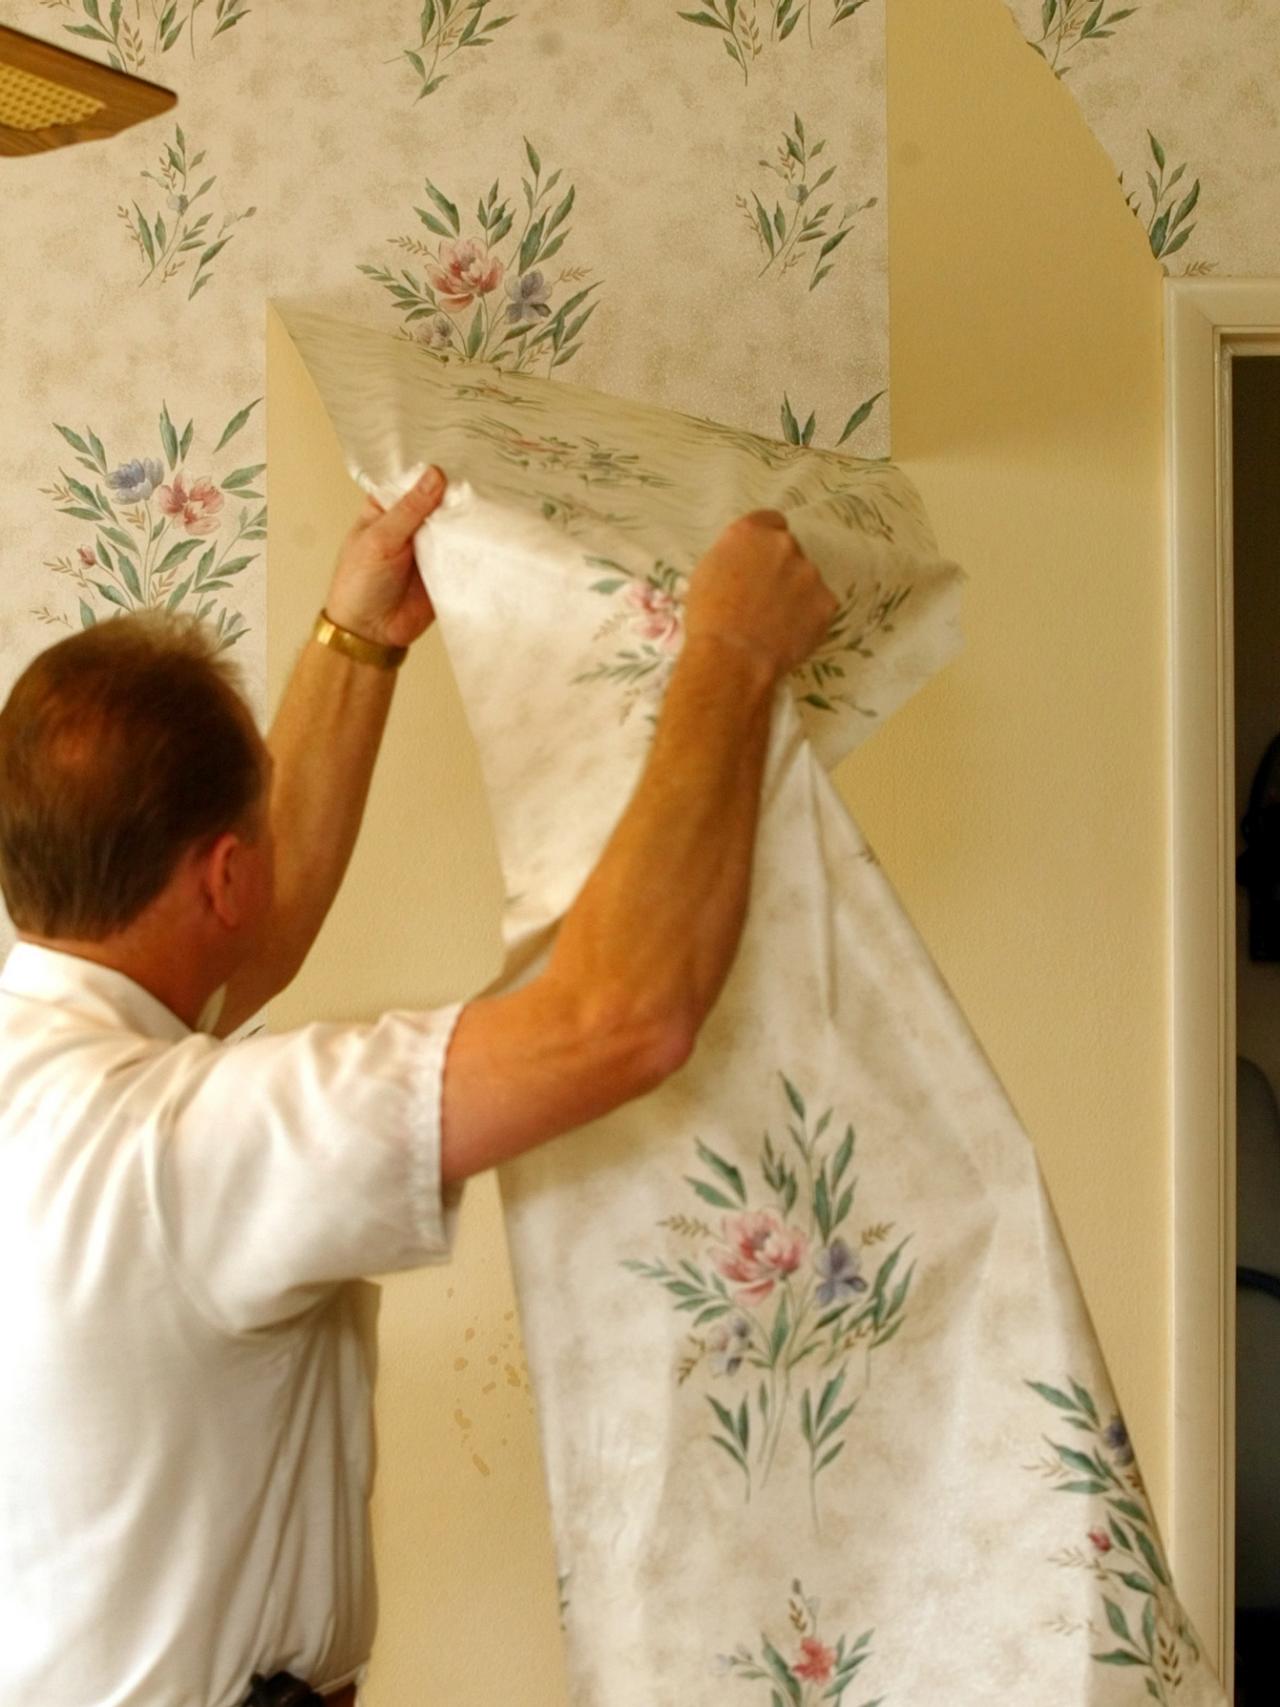 wallpaper contractor demonstrates the proper way to remove wallpaper